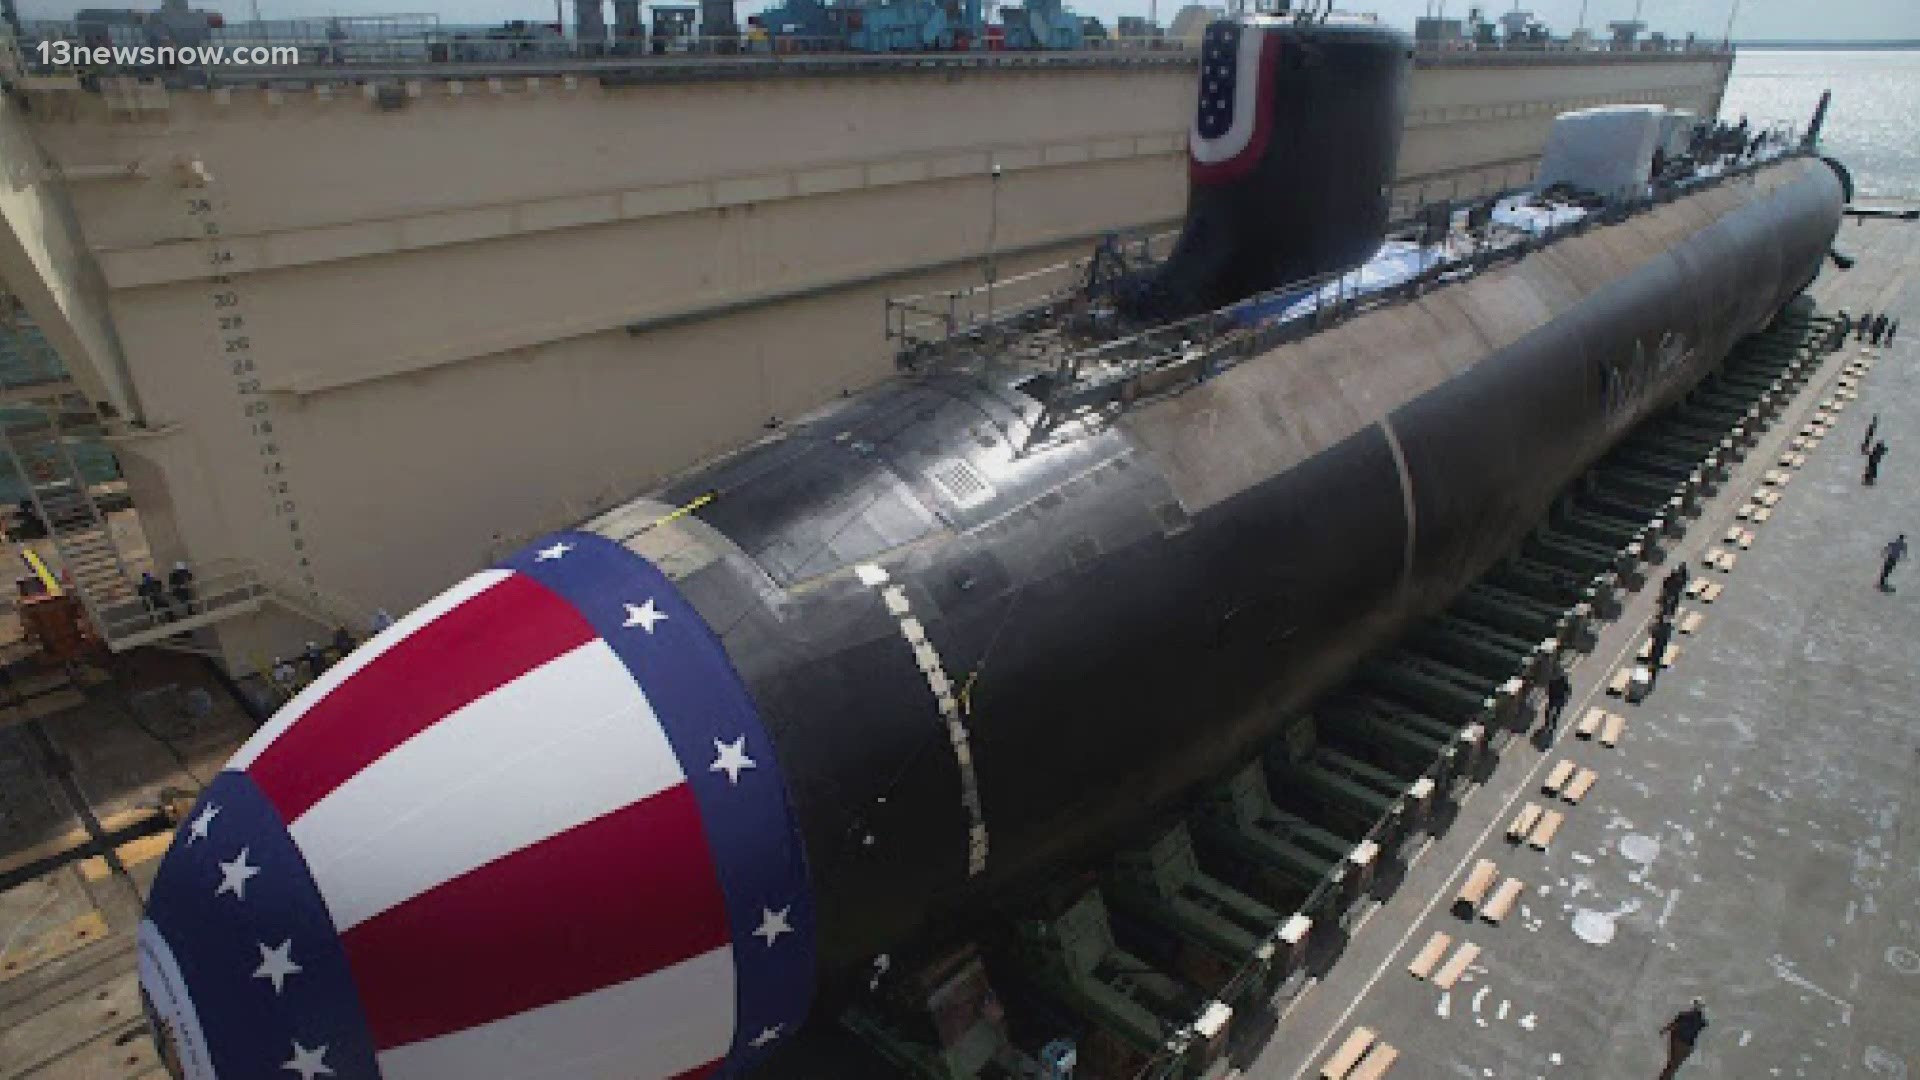 Two Virginia class submarines will be built and have been fully funded.